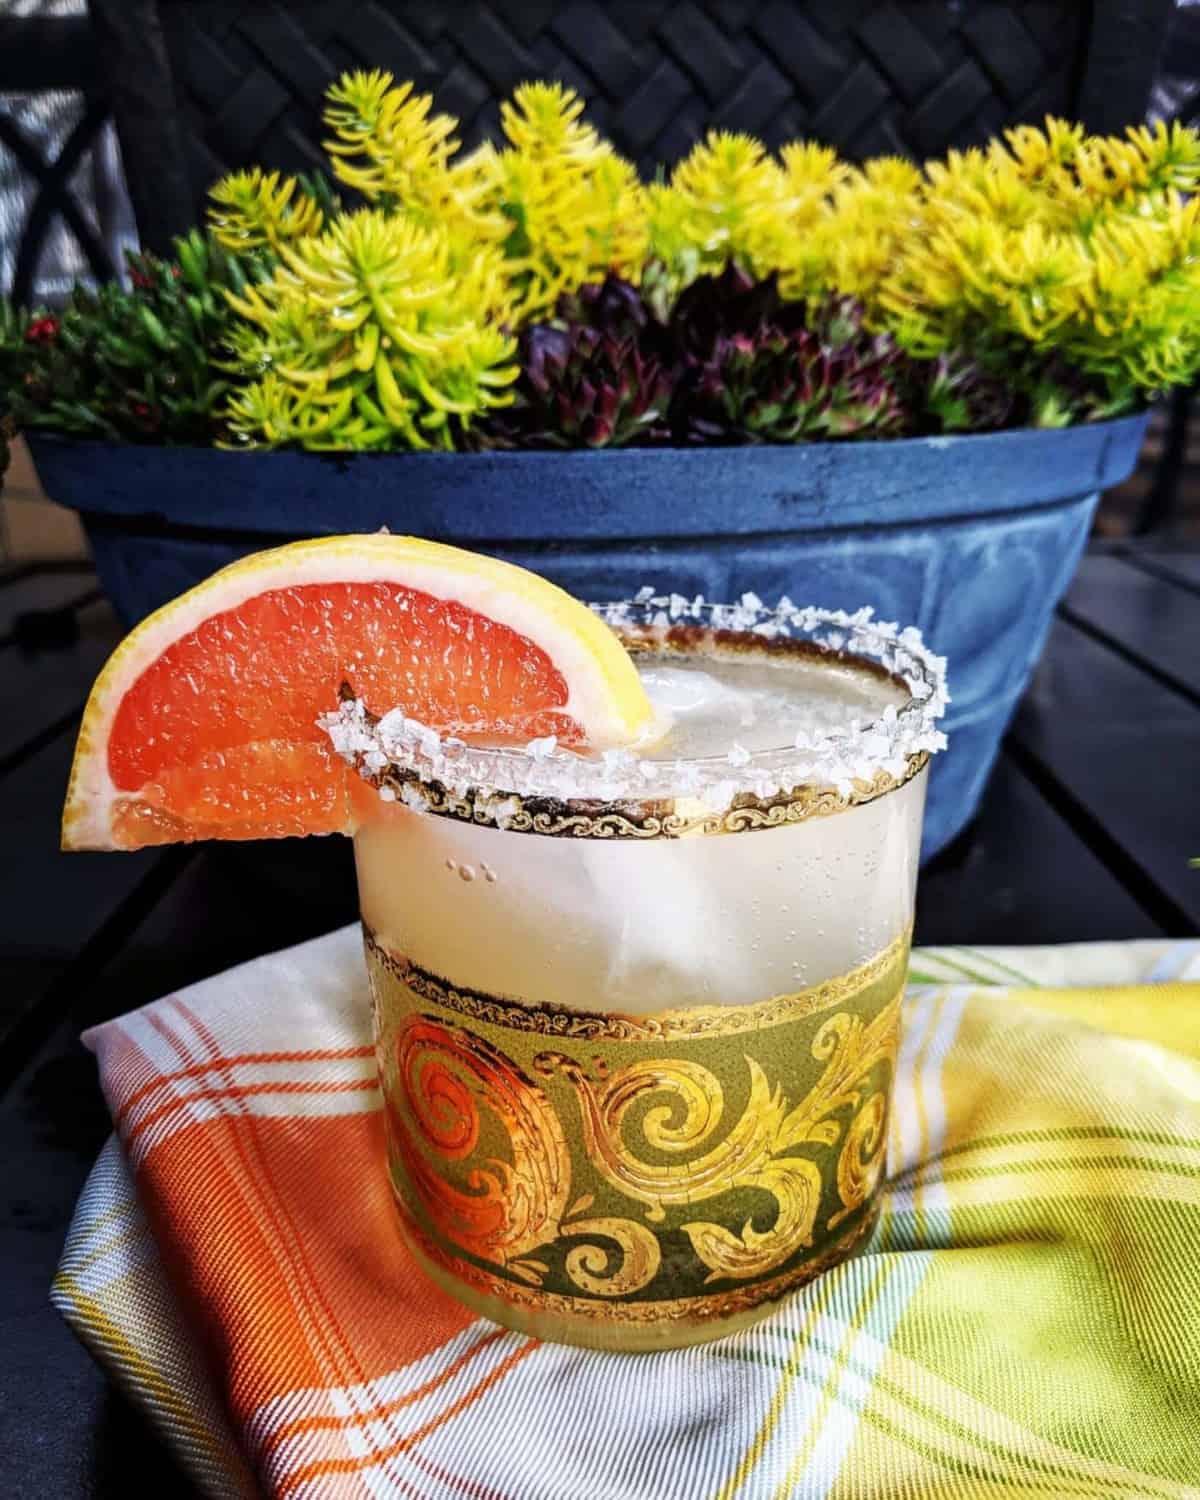 https://www.thekitchenmagpie.com/wp-content/uploads/images/2019/05/Paloma-Cocktail-Garnished.jpg